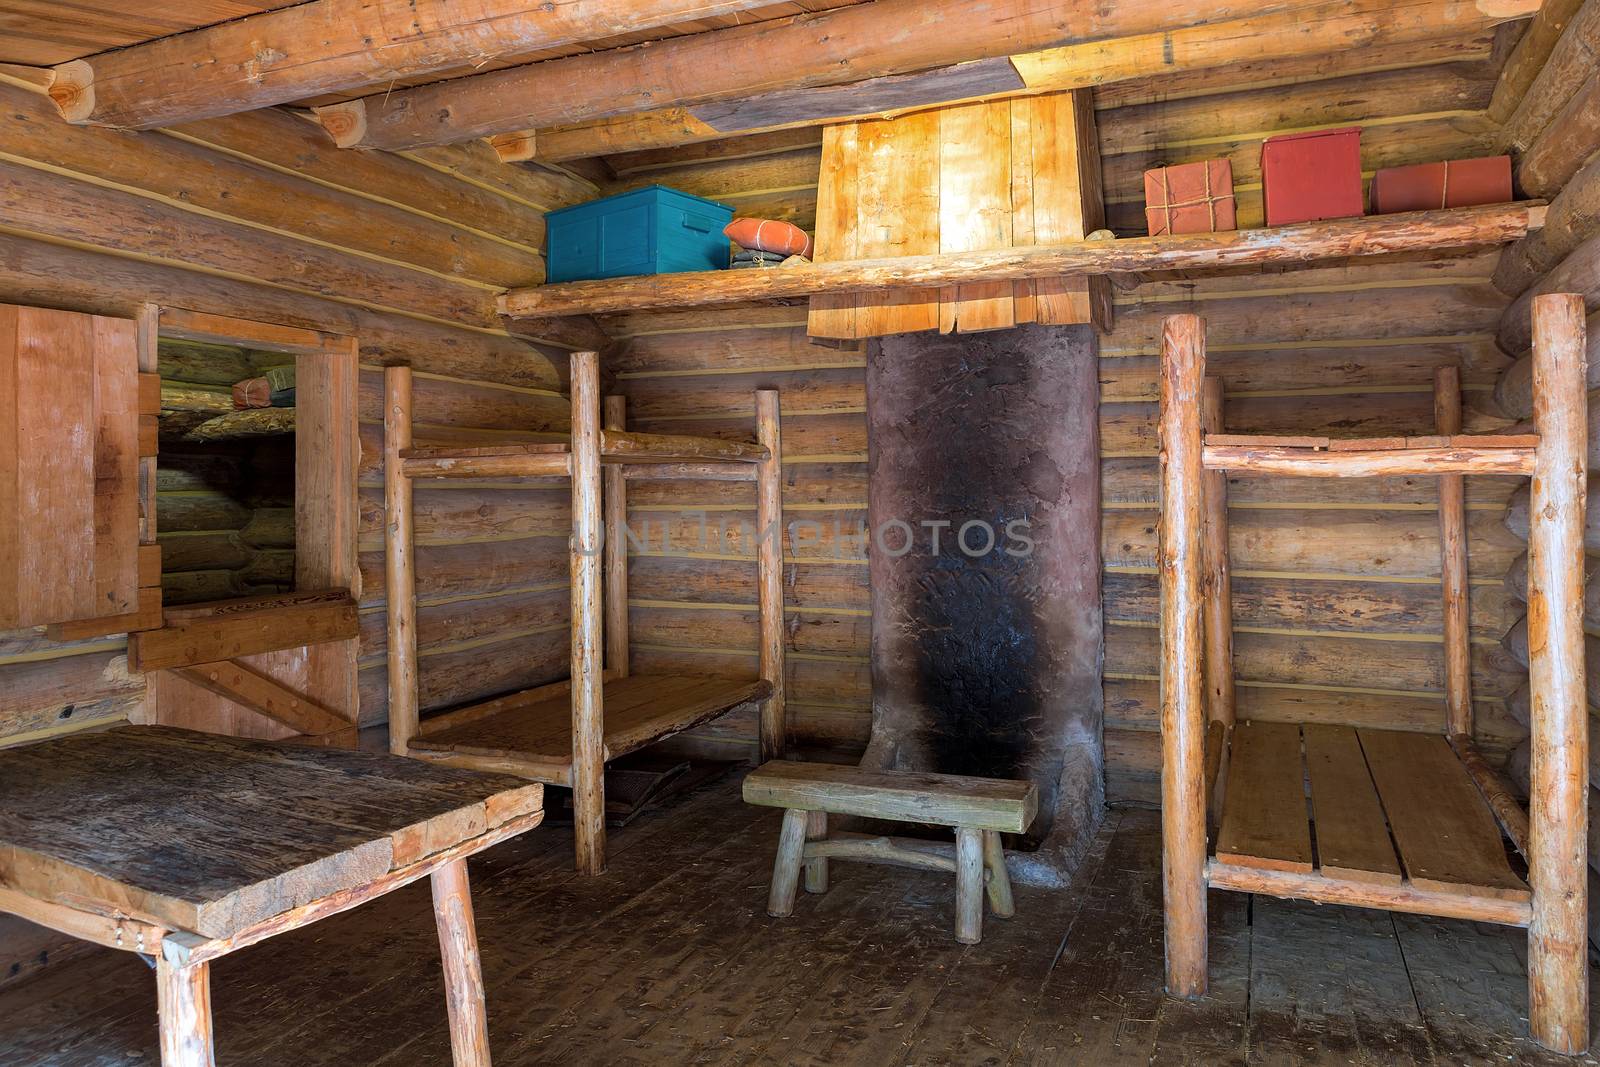 Fort Clatsop Log Cabin living quarters with bunk beds table and chair in Lewis and Clark Historical National State Park